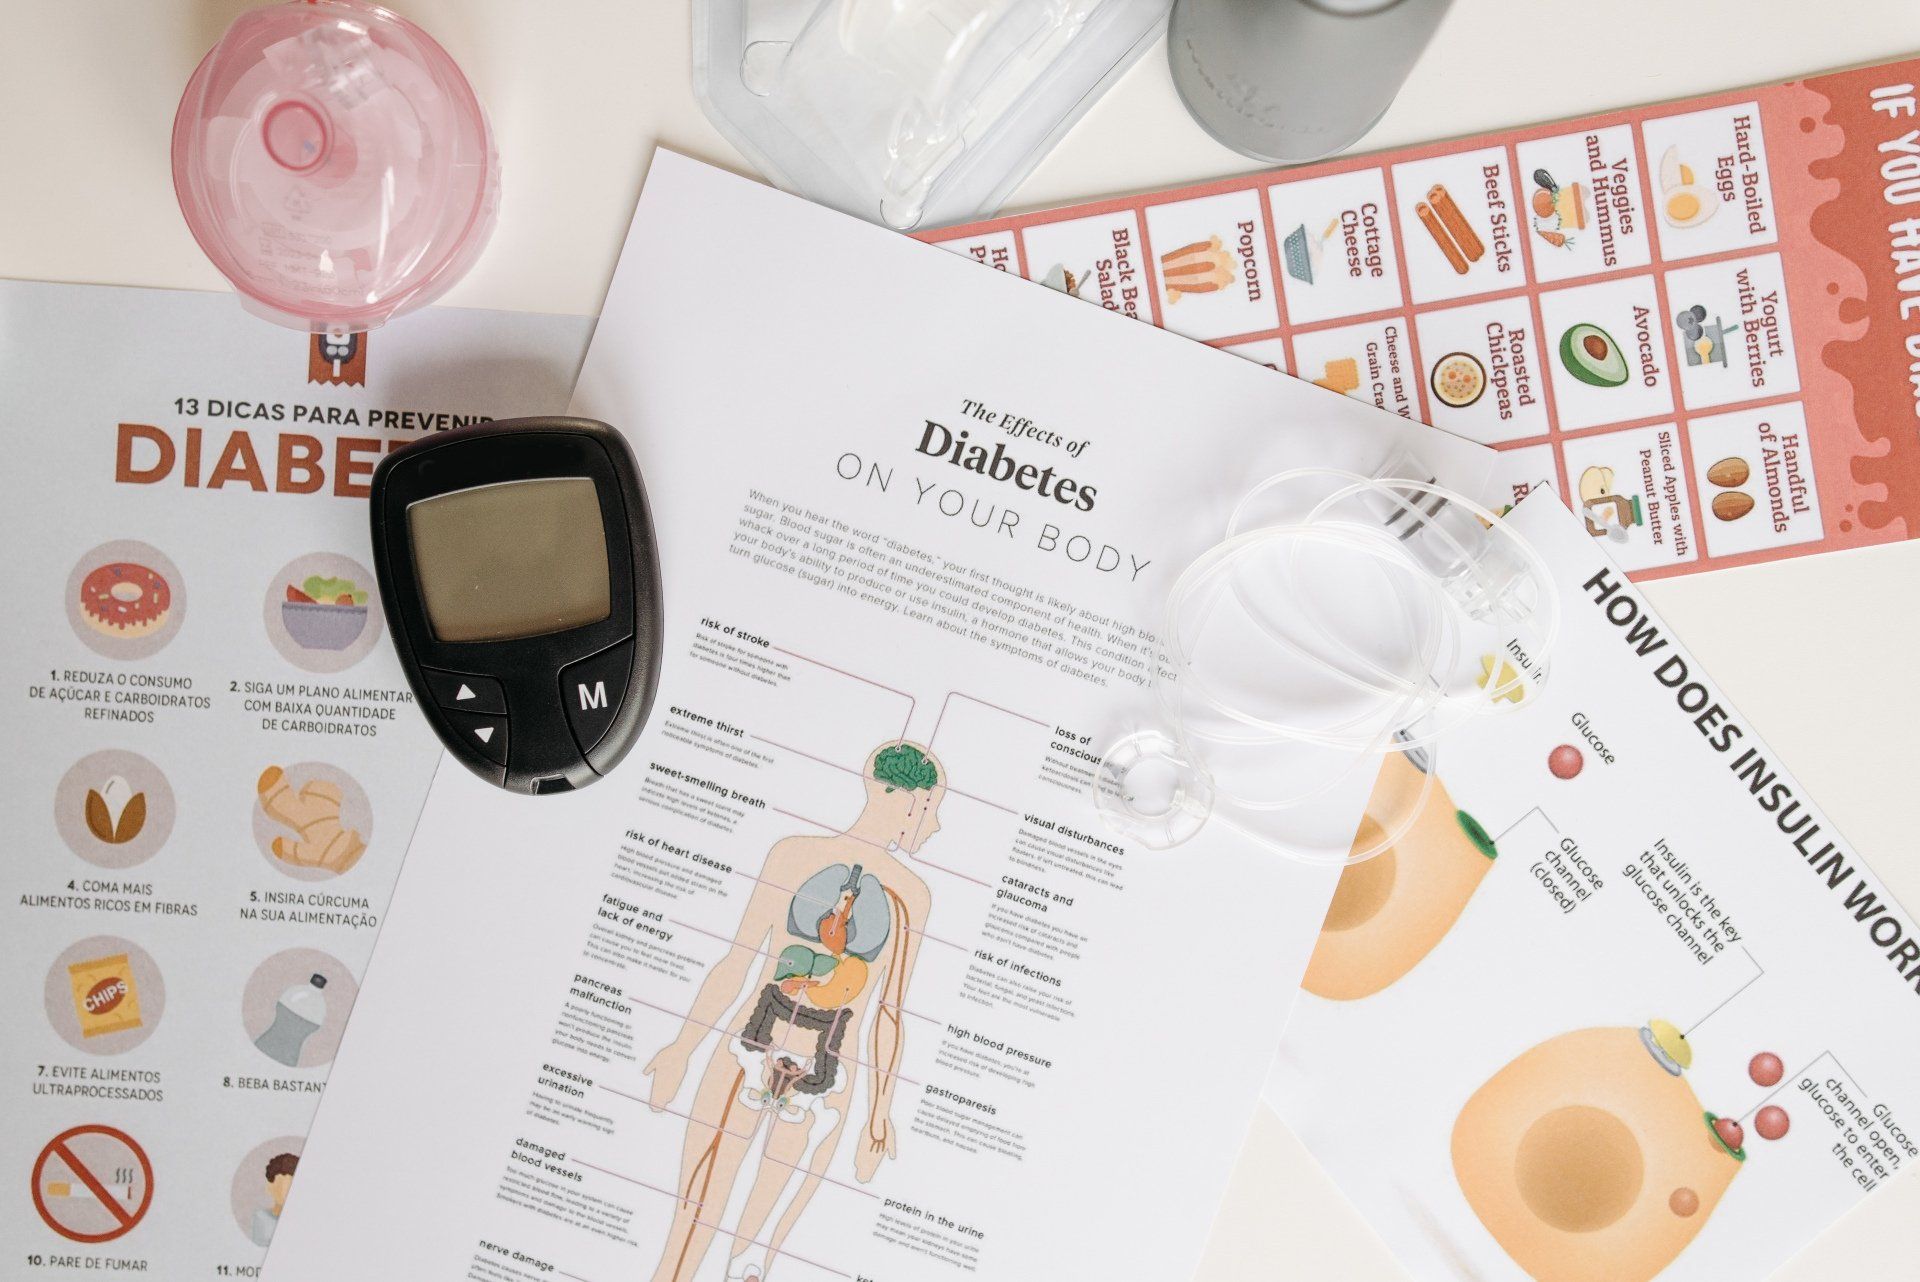 Diabetic charts for foot health 